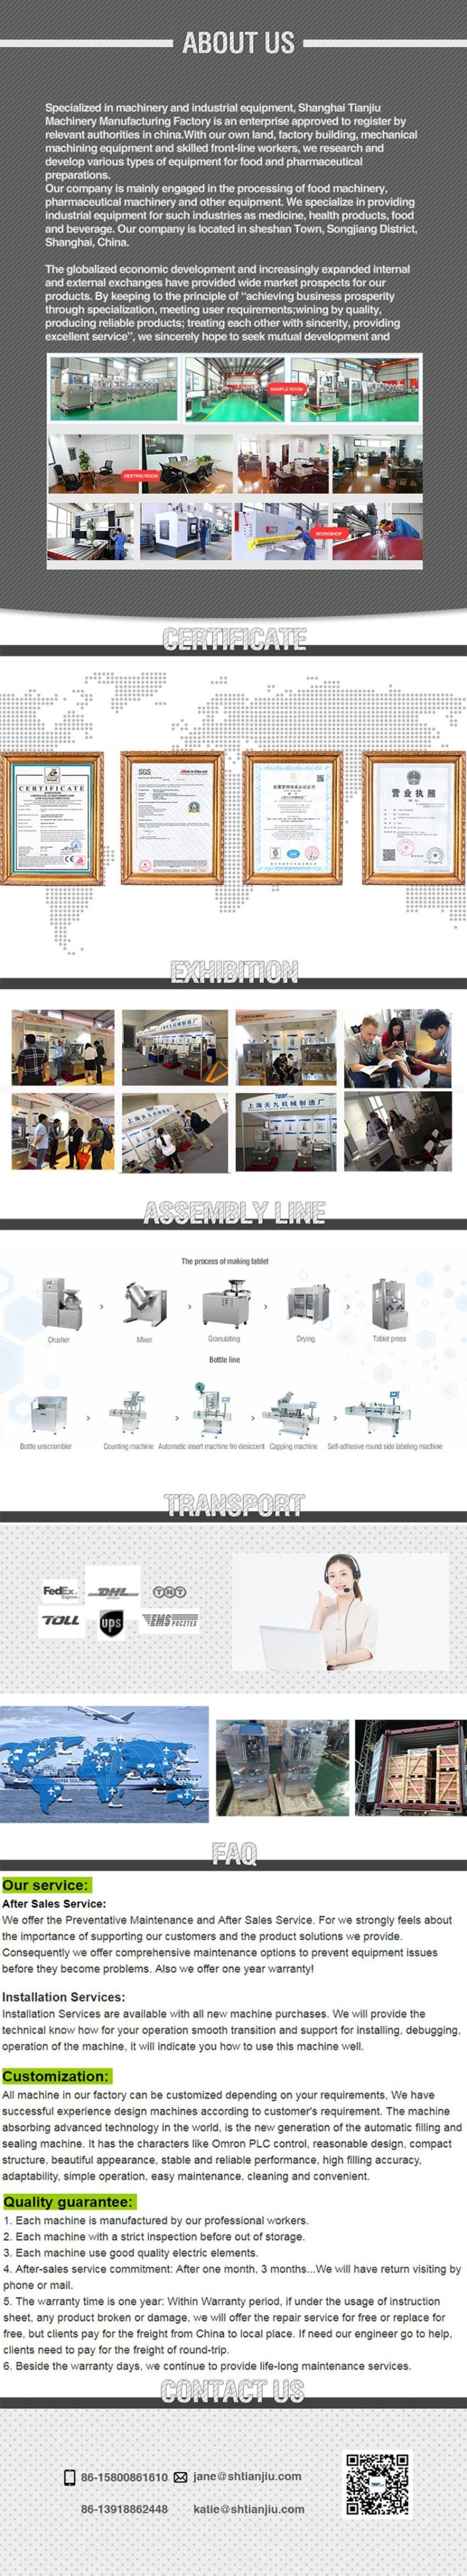 Automatic Coco Powder Automatic Wrapping Machine